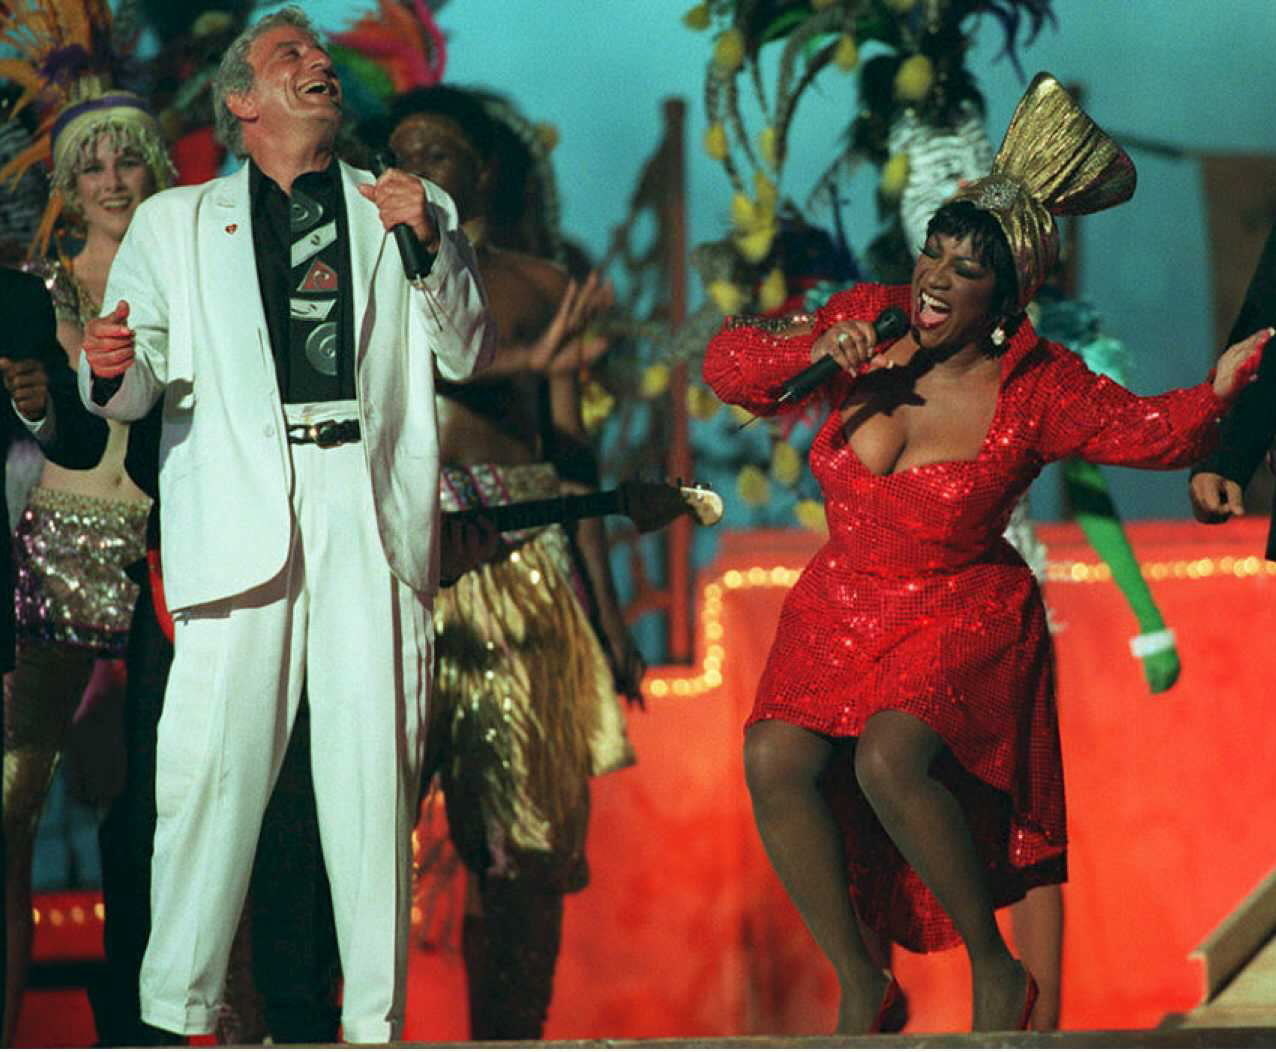 US Singers Tony Bennett (L) and Patti LaBelle perform 29 January 1995 during the haltime show of Super Bowl XXIX